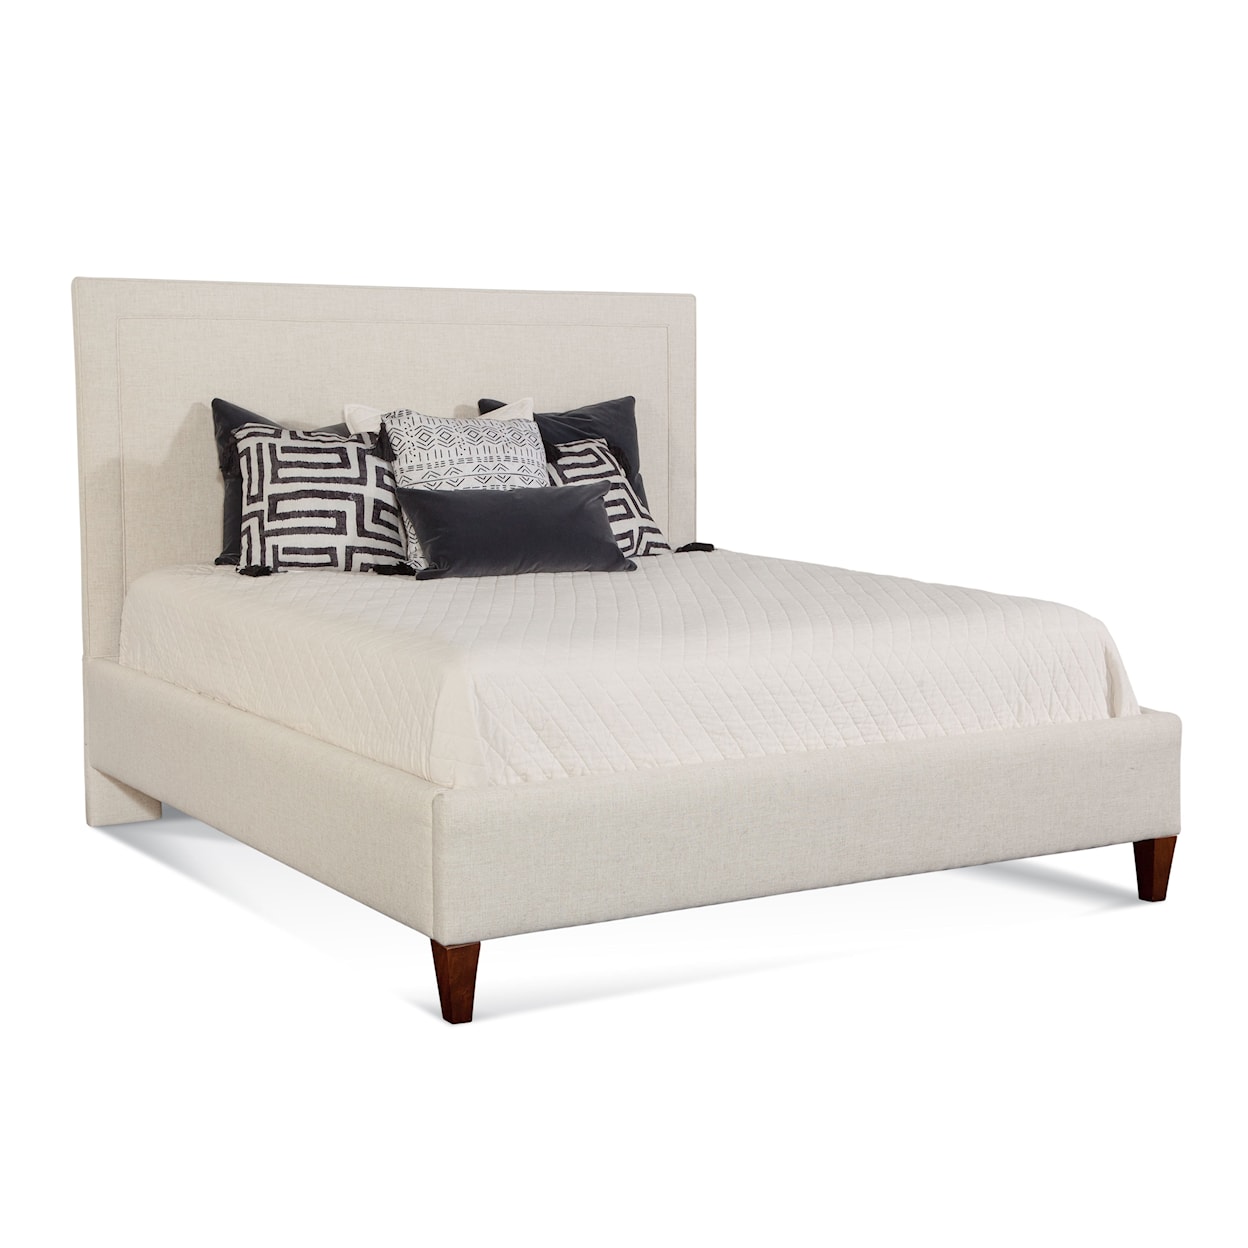 Braxton Culler Emory Queen Bed